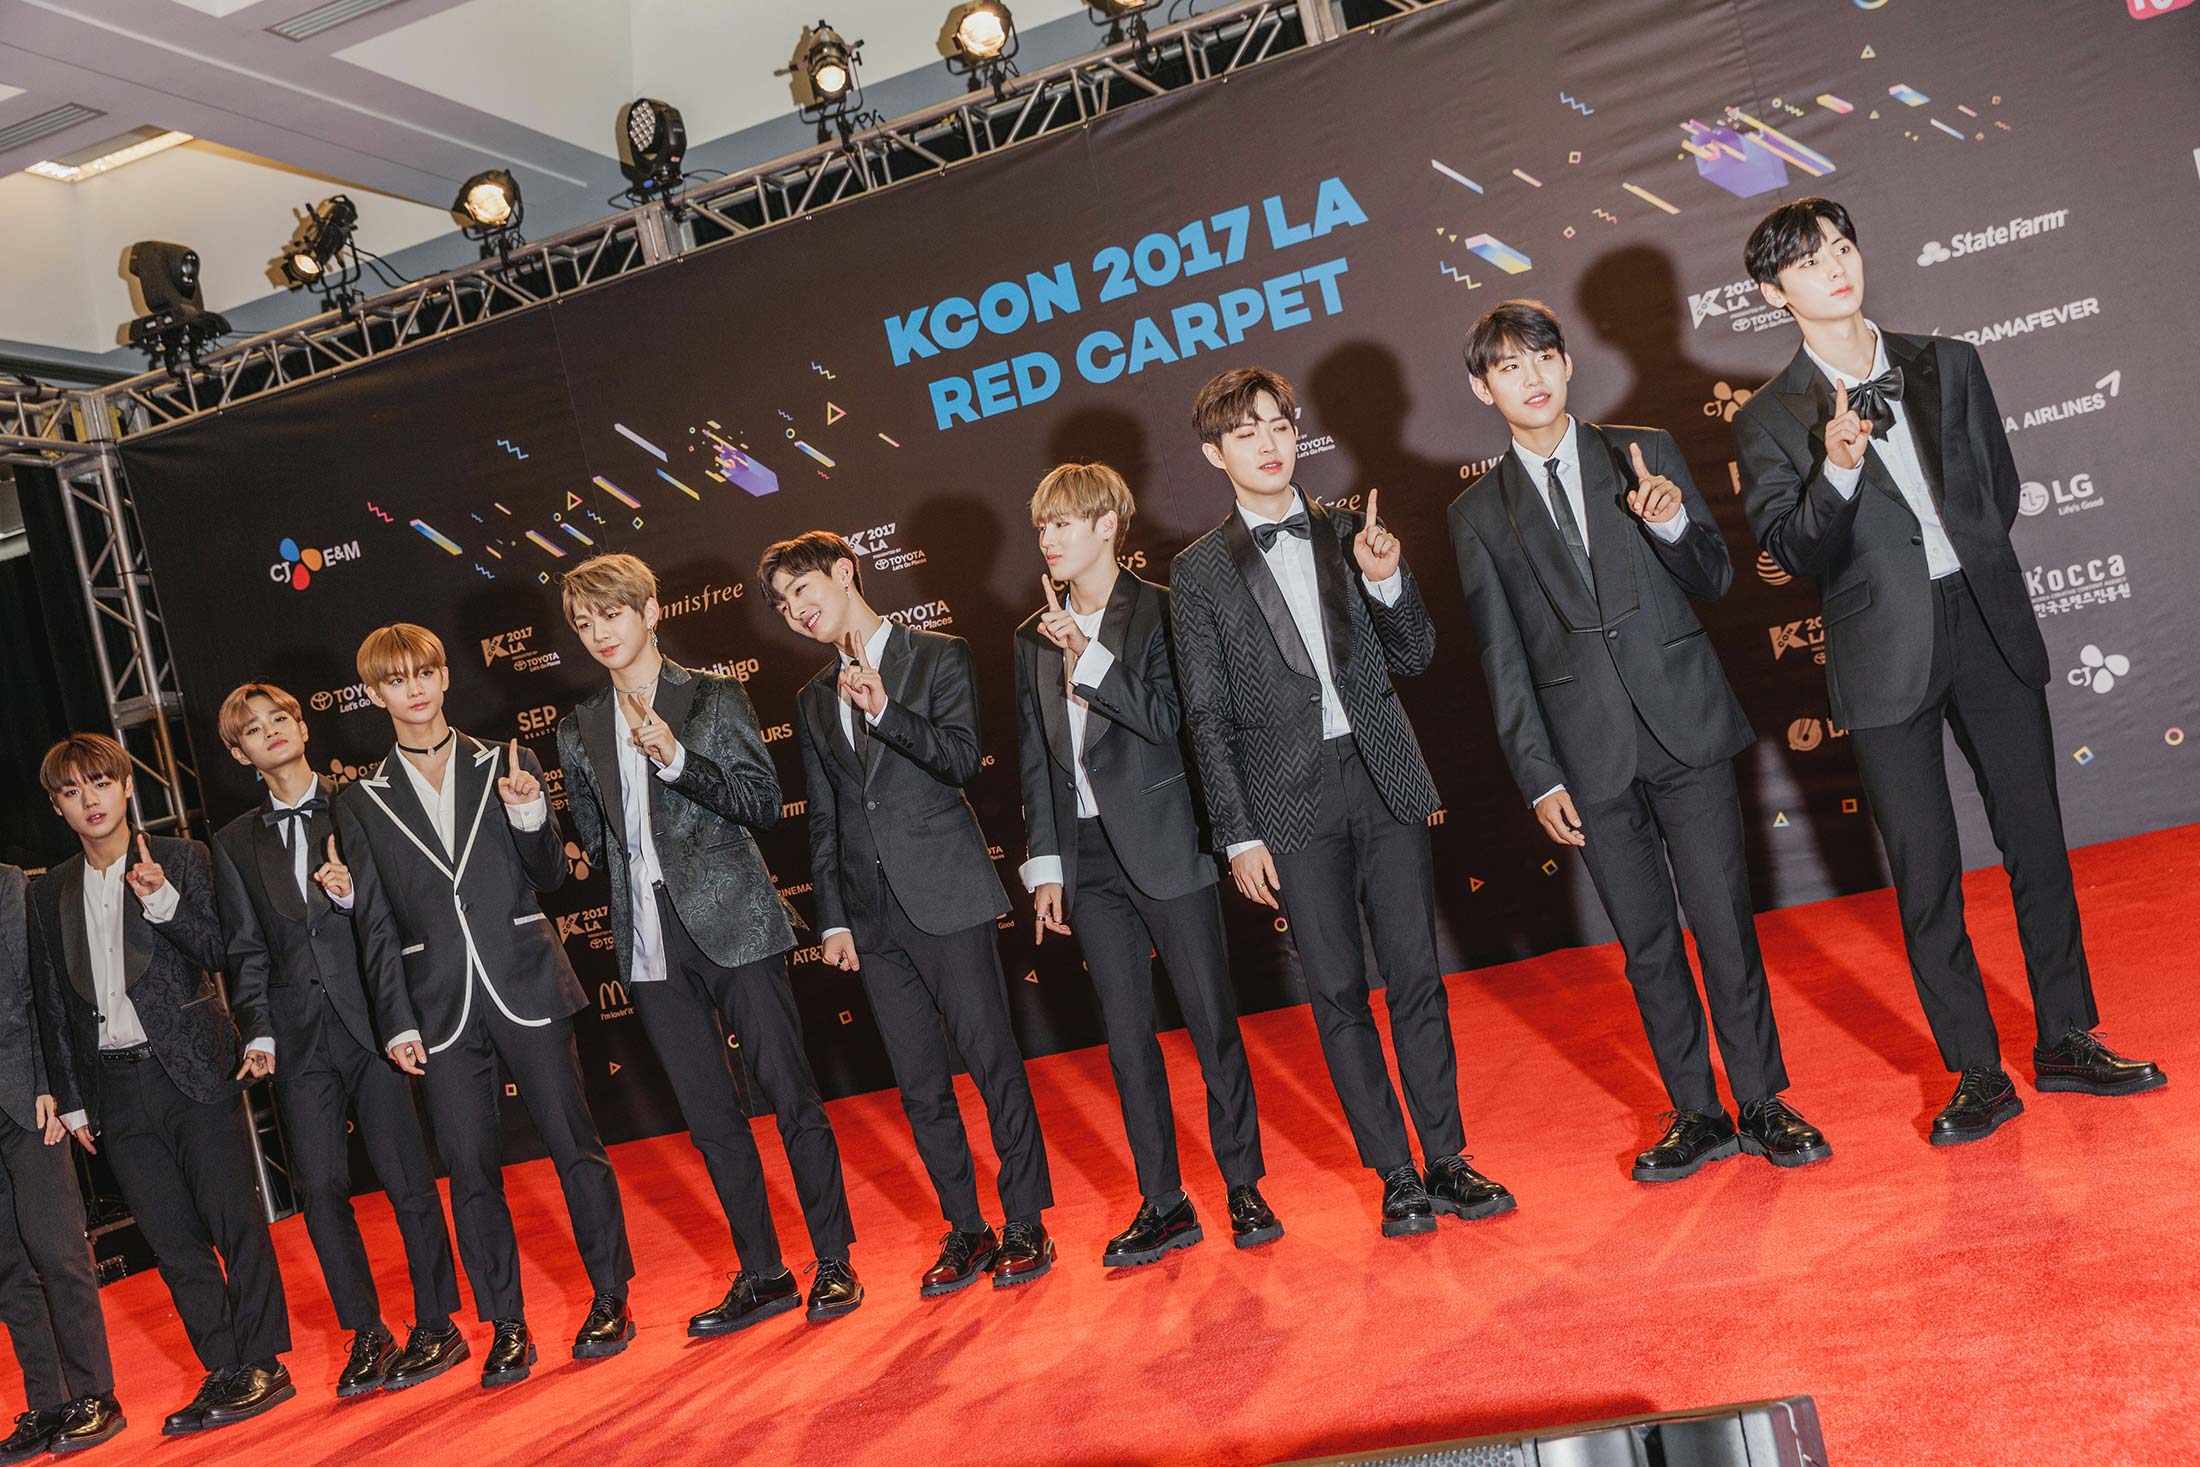 The K-pop industry has taken the world by storm and is rapidly rising to  become